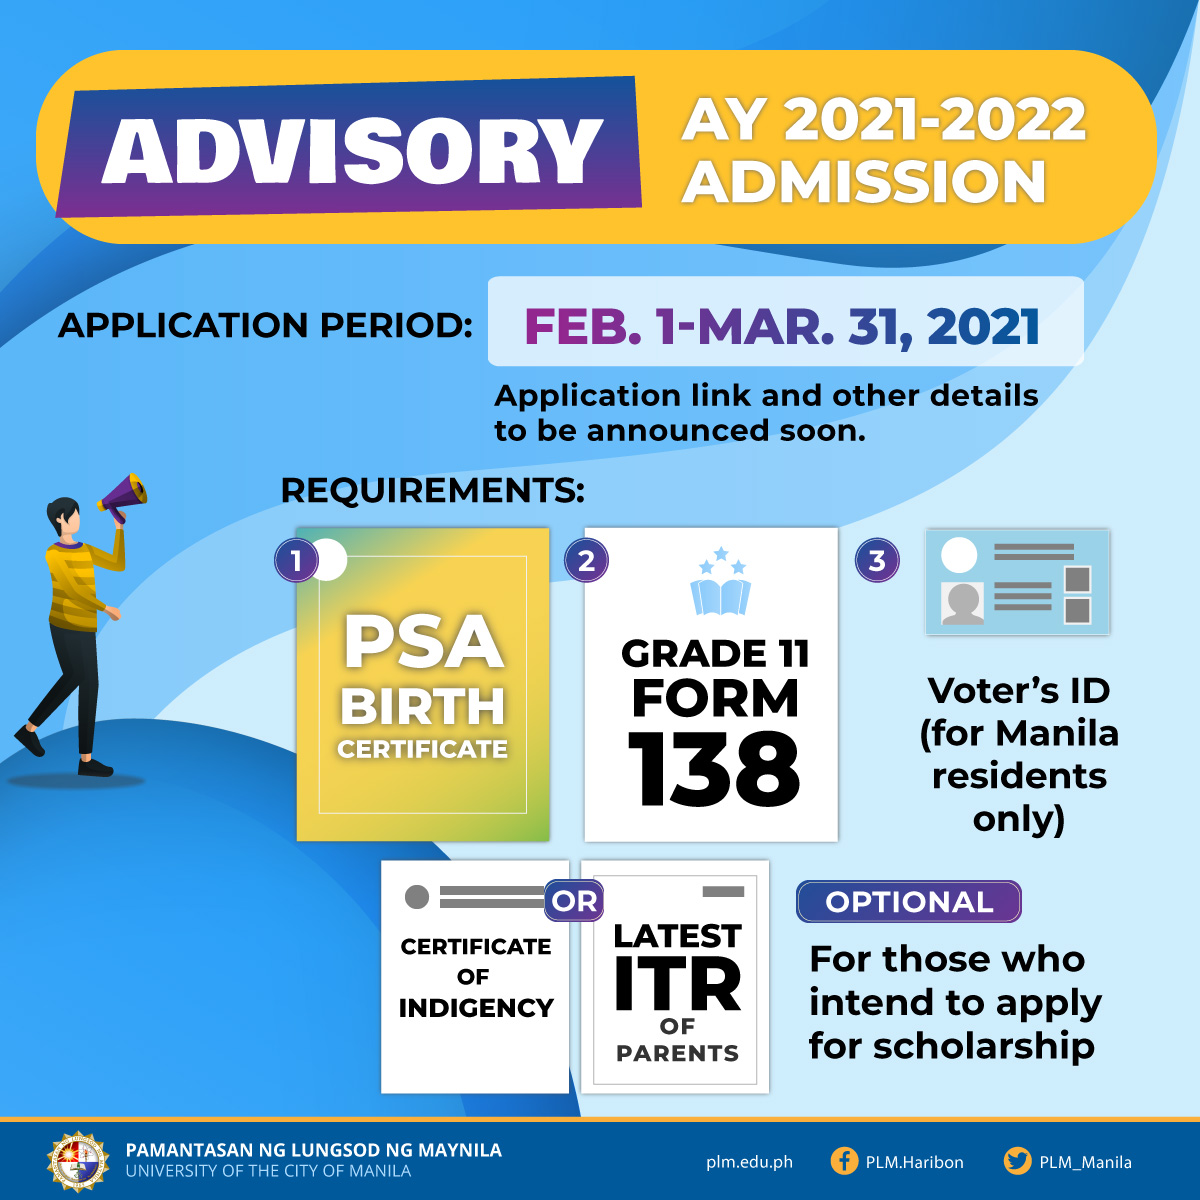 PLM to open freshmen applications for Academic Year 2021-2022